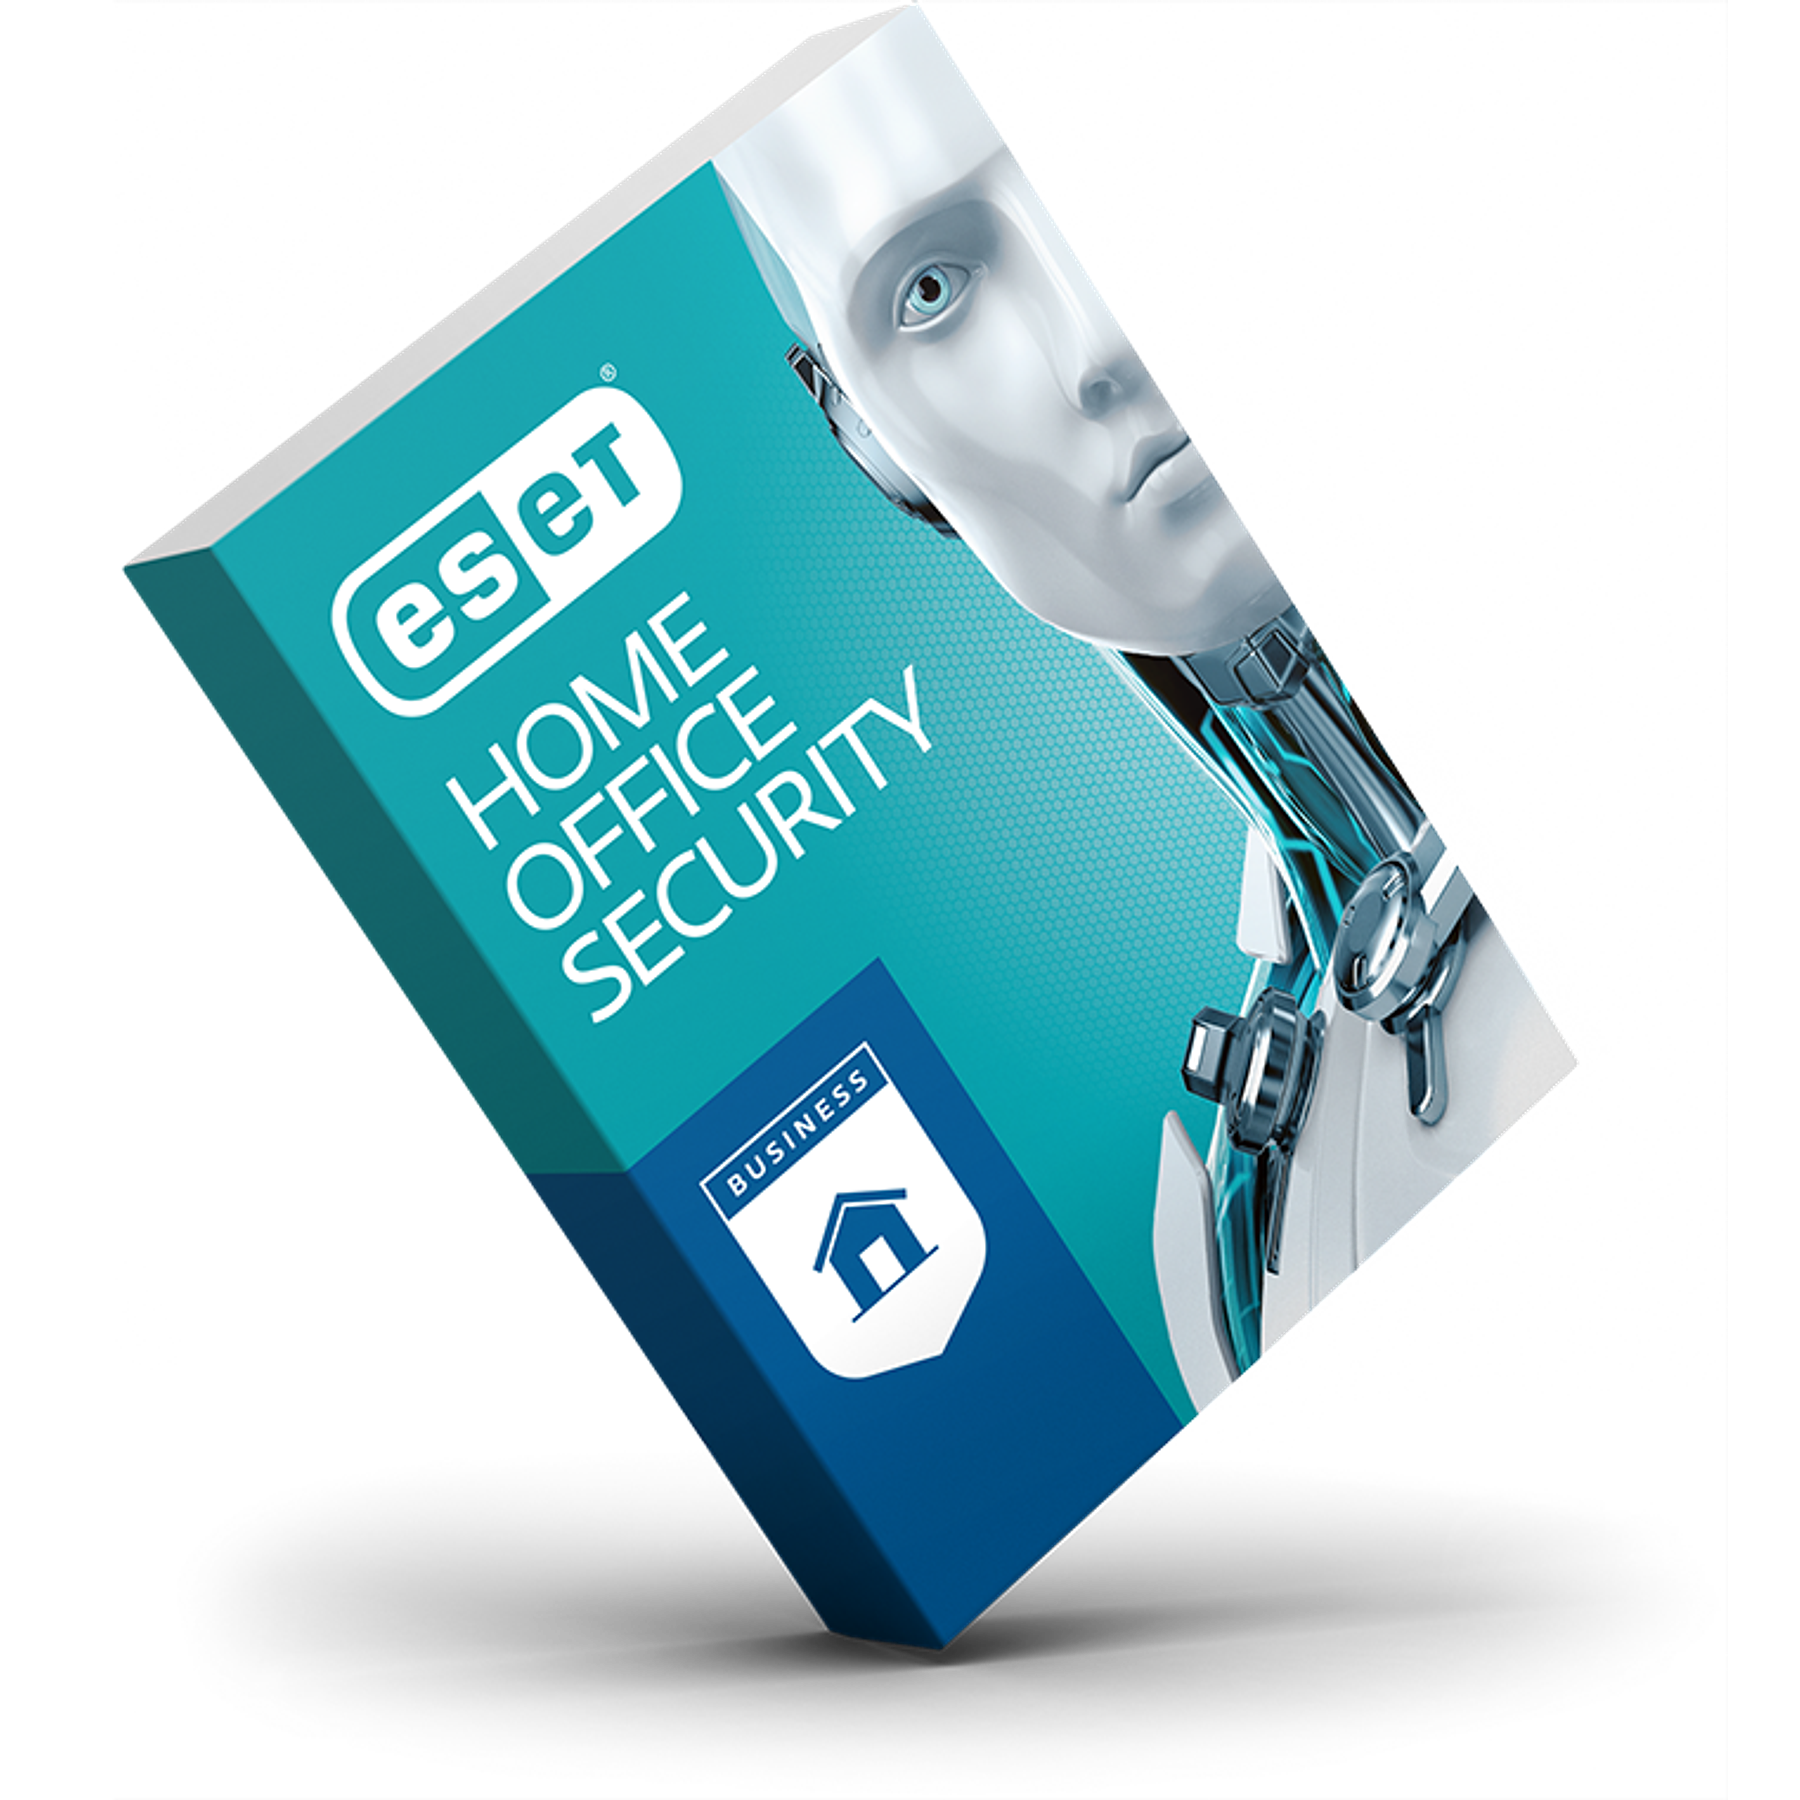 Eset Home Office Security 25 Equipos